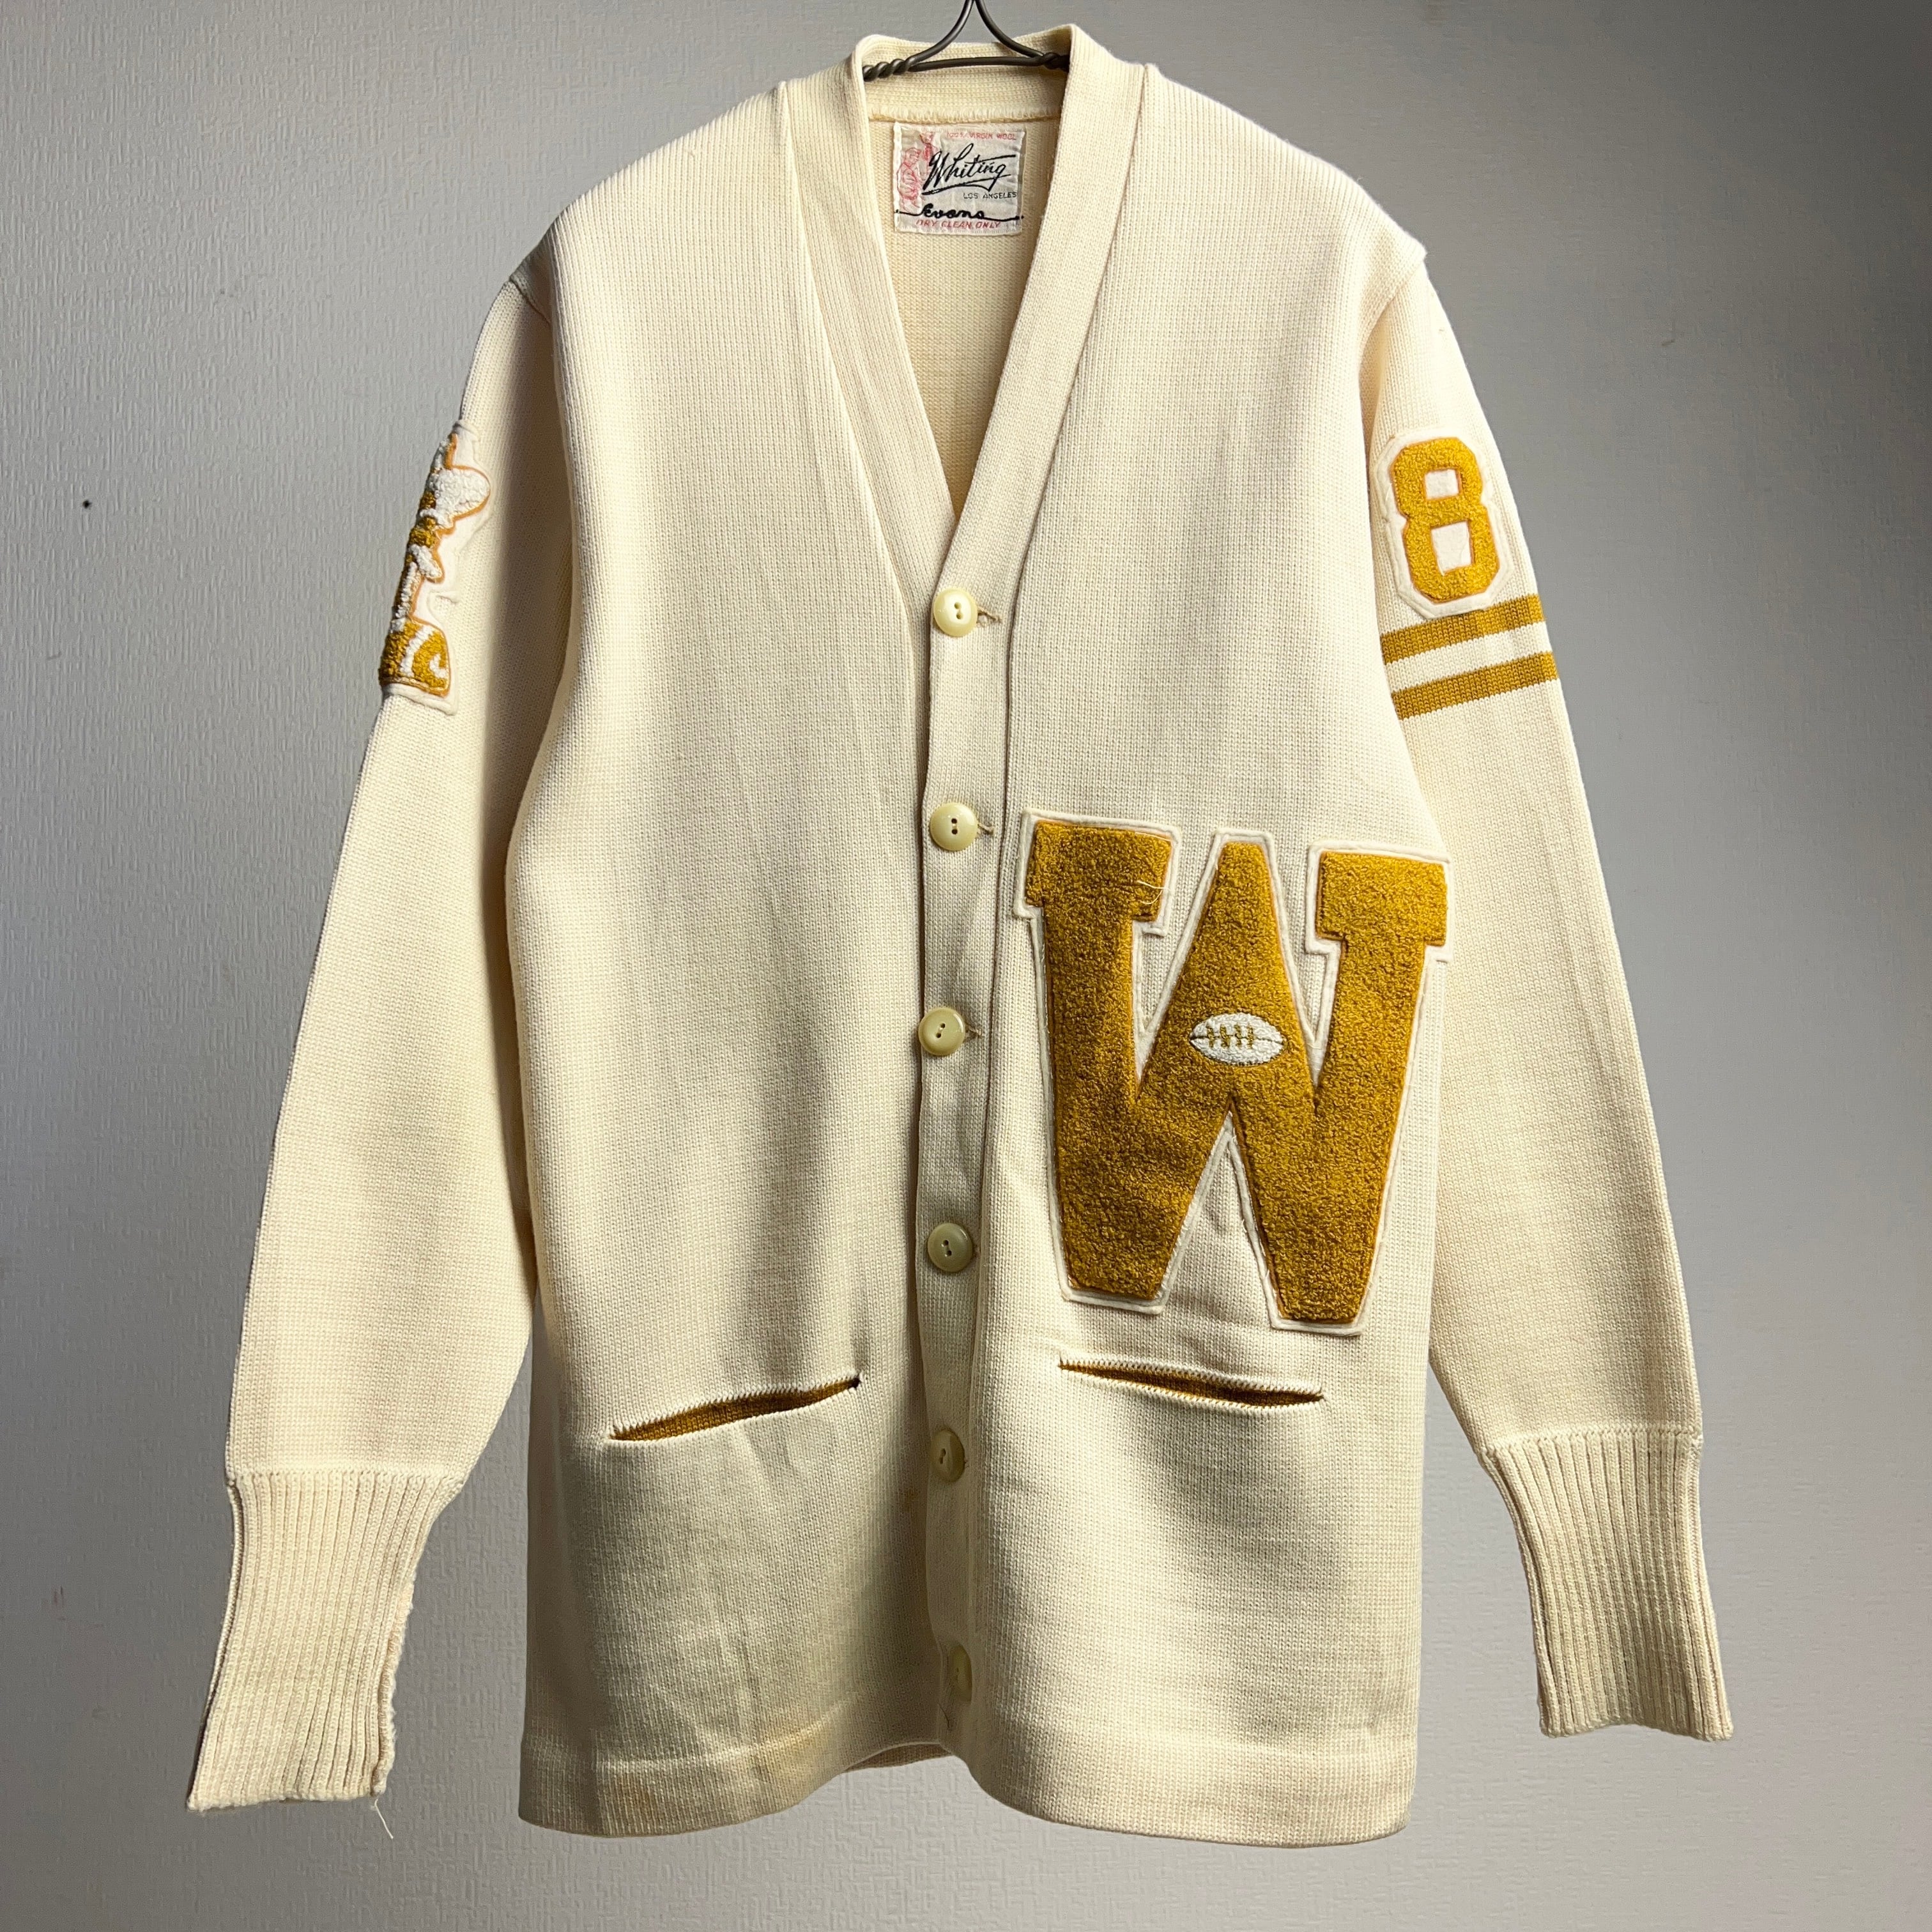 50's~60's “Whiting” Lettered Cardigan 50年代 60年代 レタード 